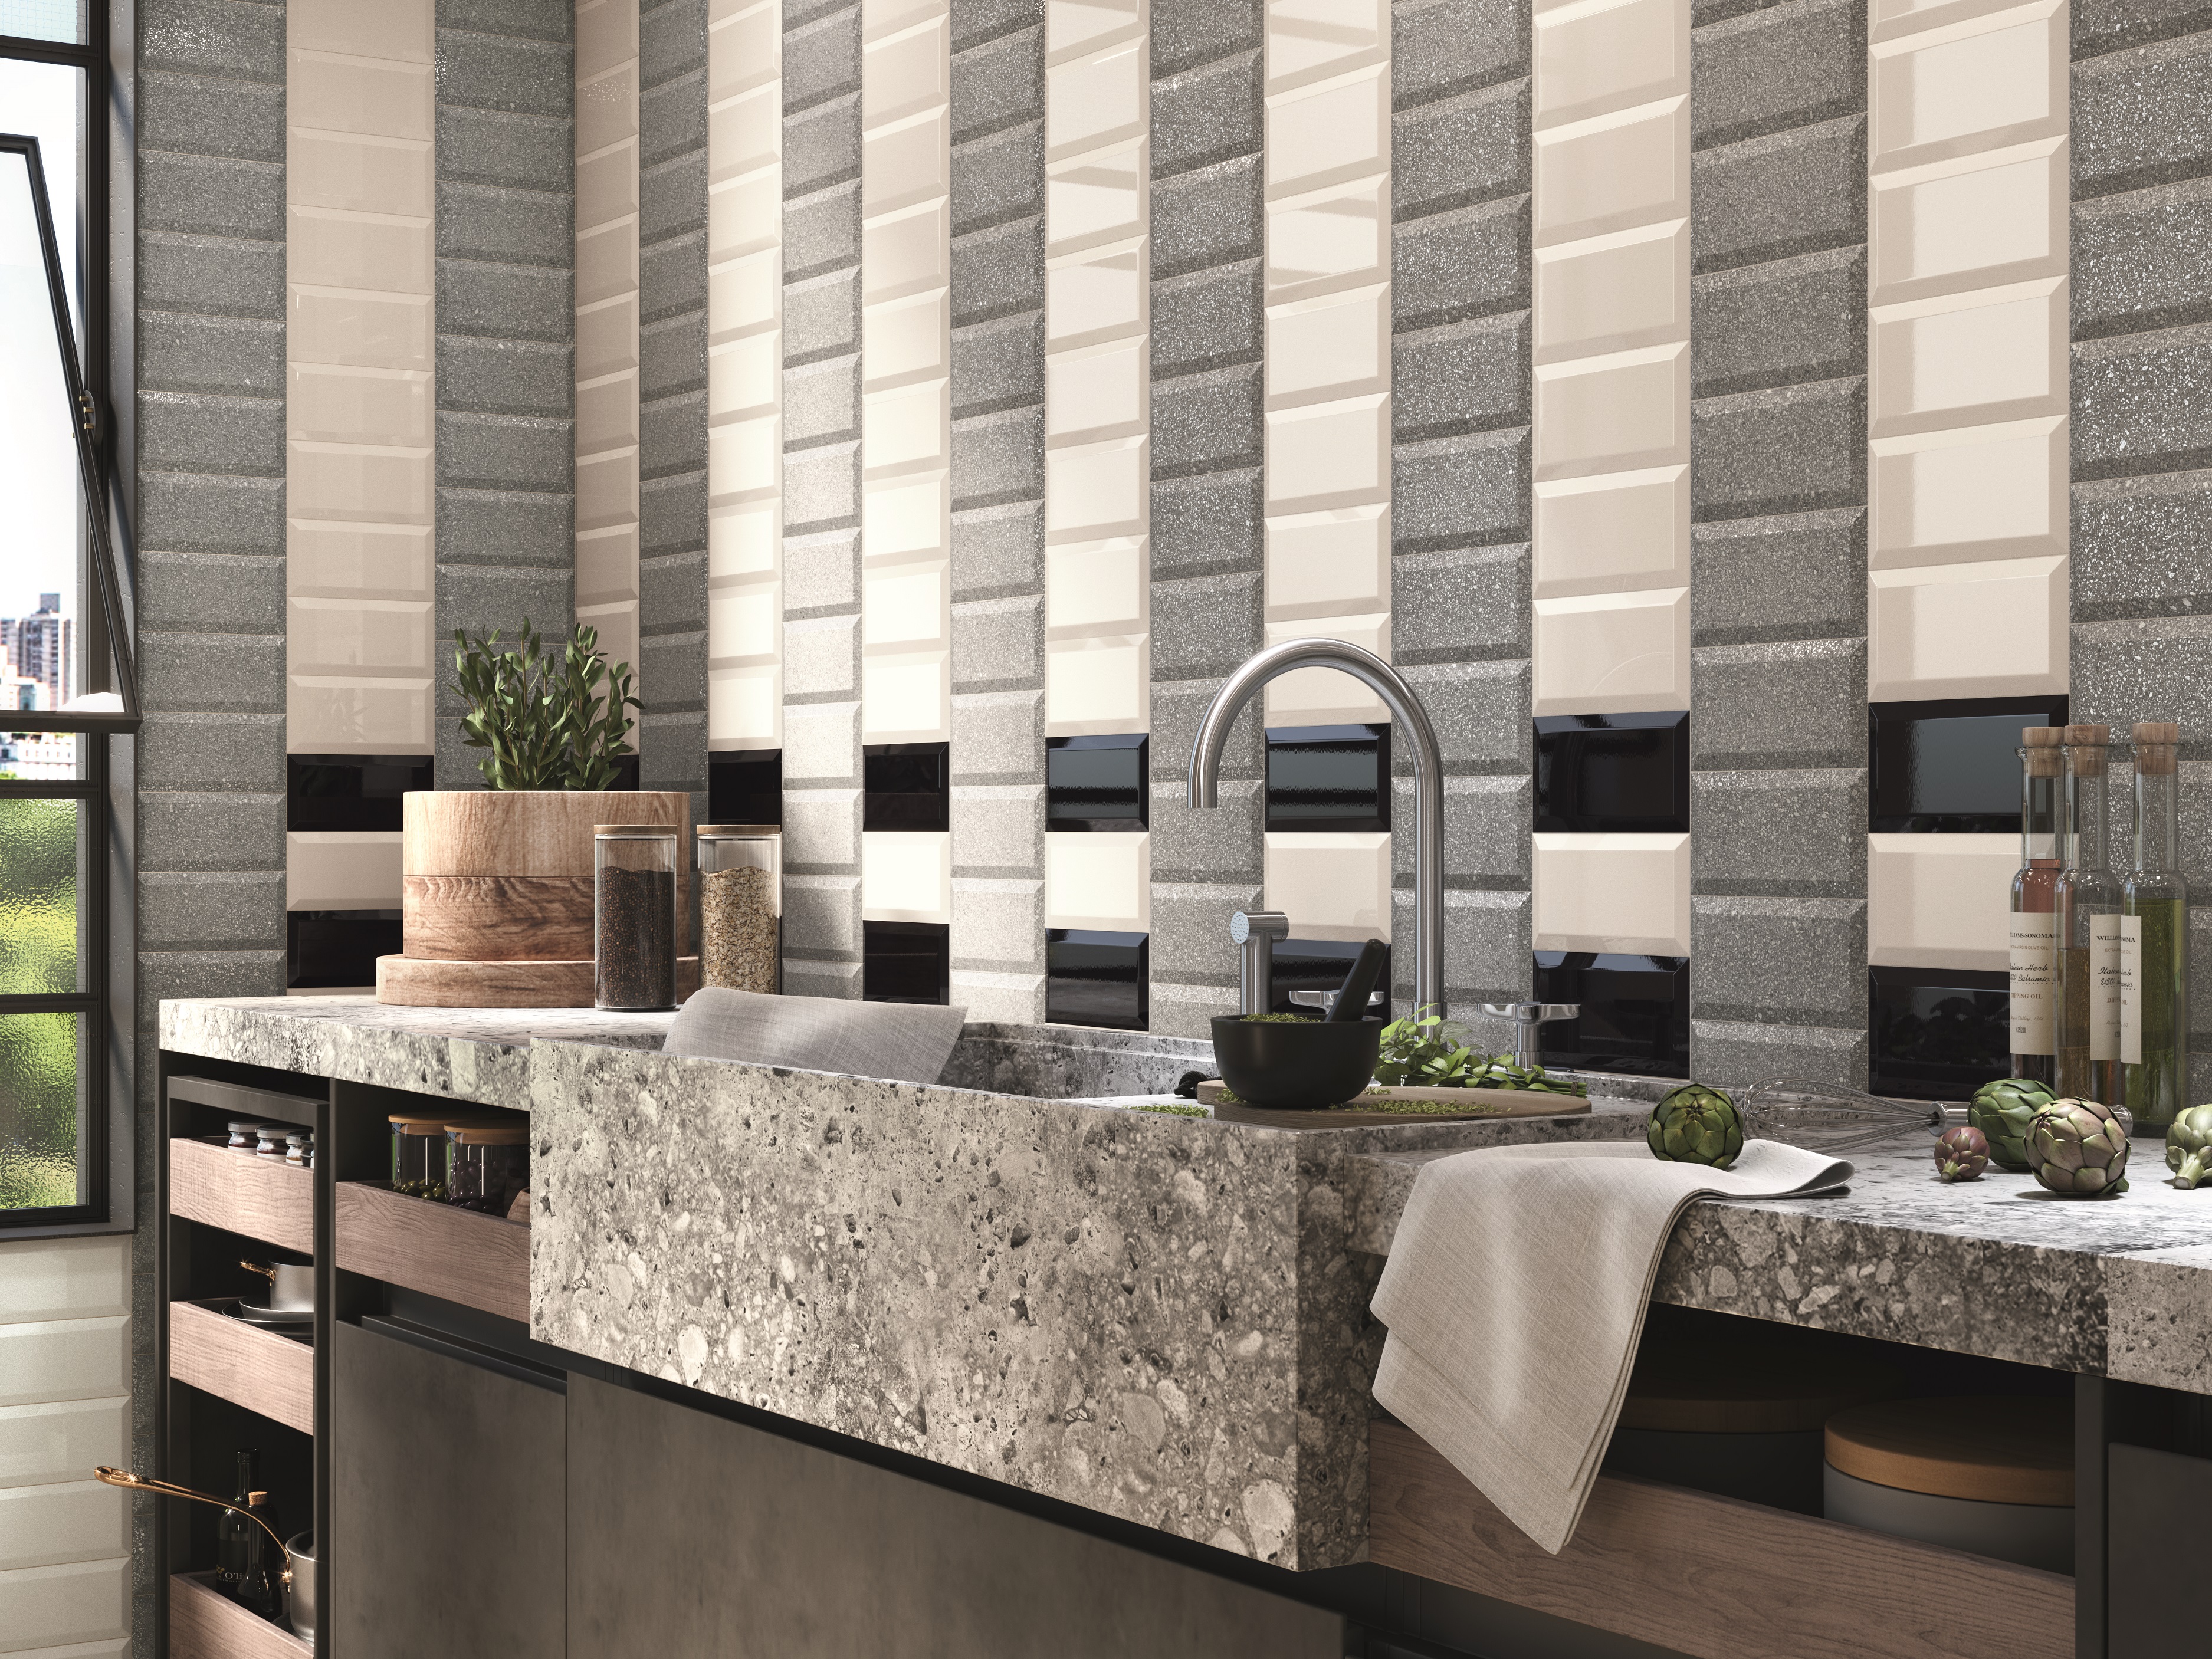 Avenue Granite Mix Picadilly White Black Subway Modern Miami Accent Wall Kitchen Backsplash Associates Tile Manufacturing,Wall Paint Design Ideas With Tape For Girls